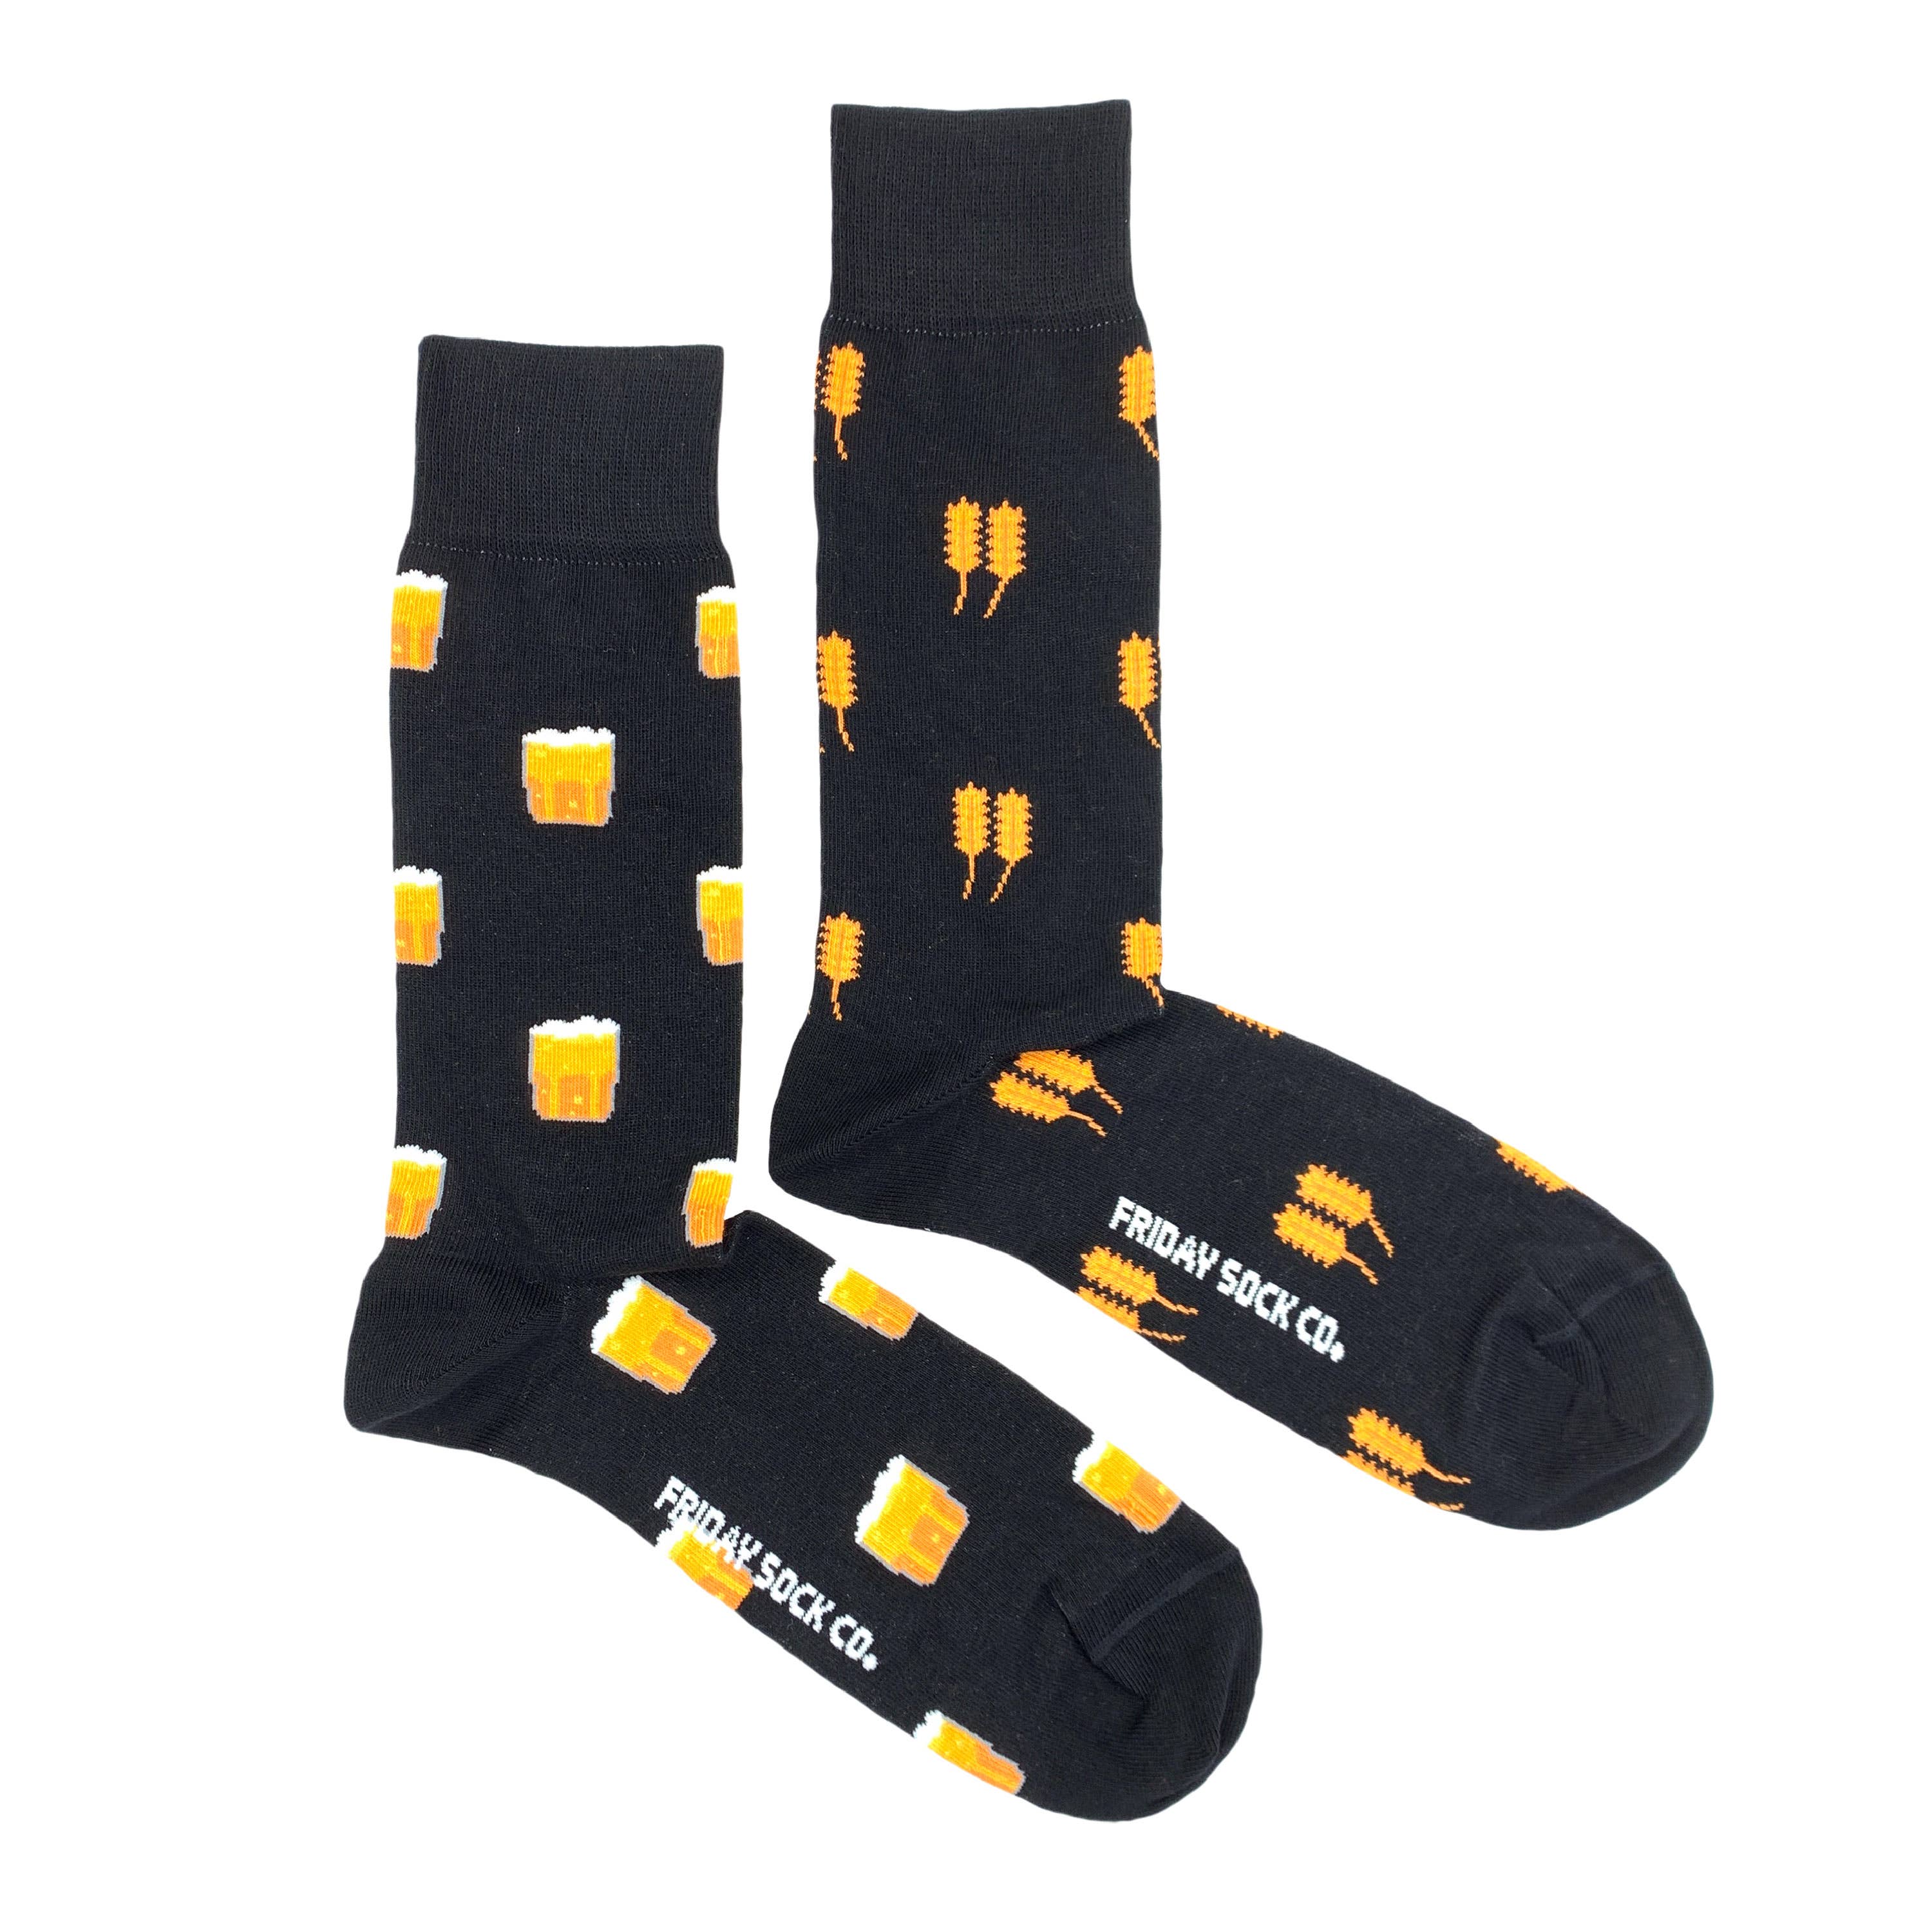 The Beer Men's Mismatch Socks by Friday Sock Co. – Thread + Seed